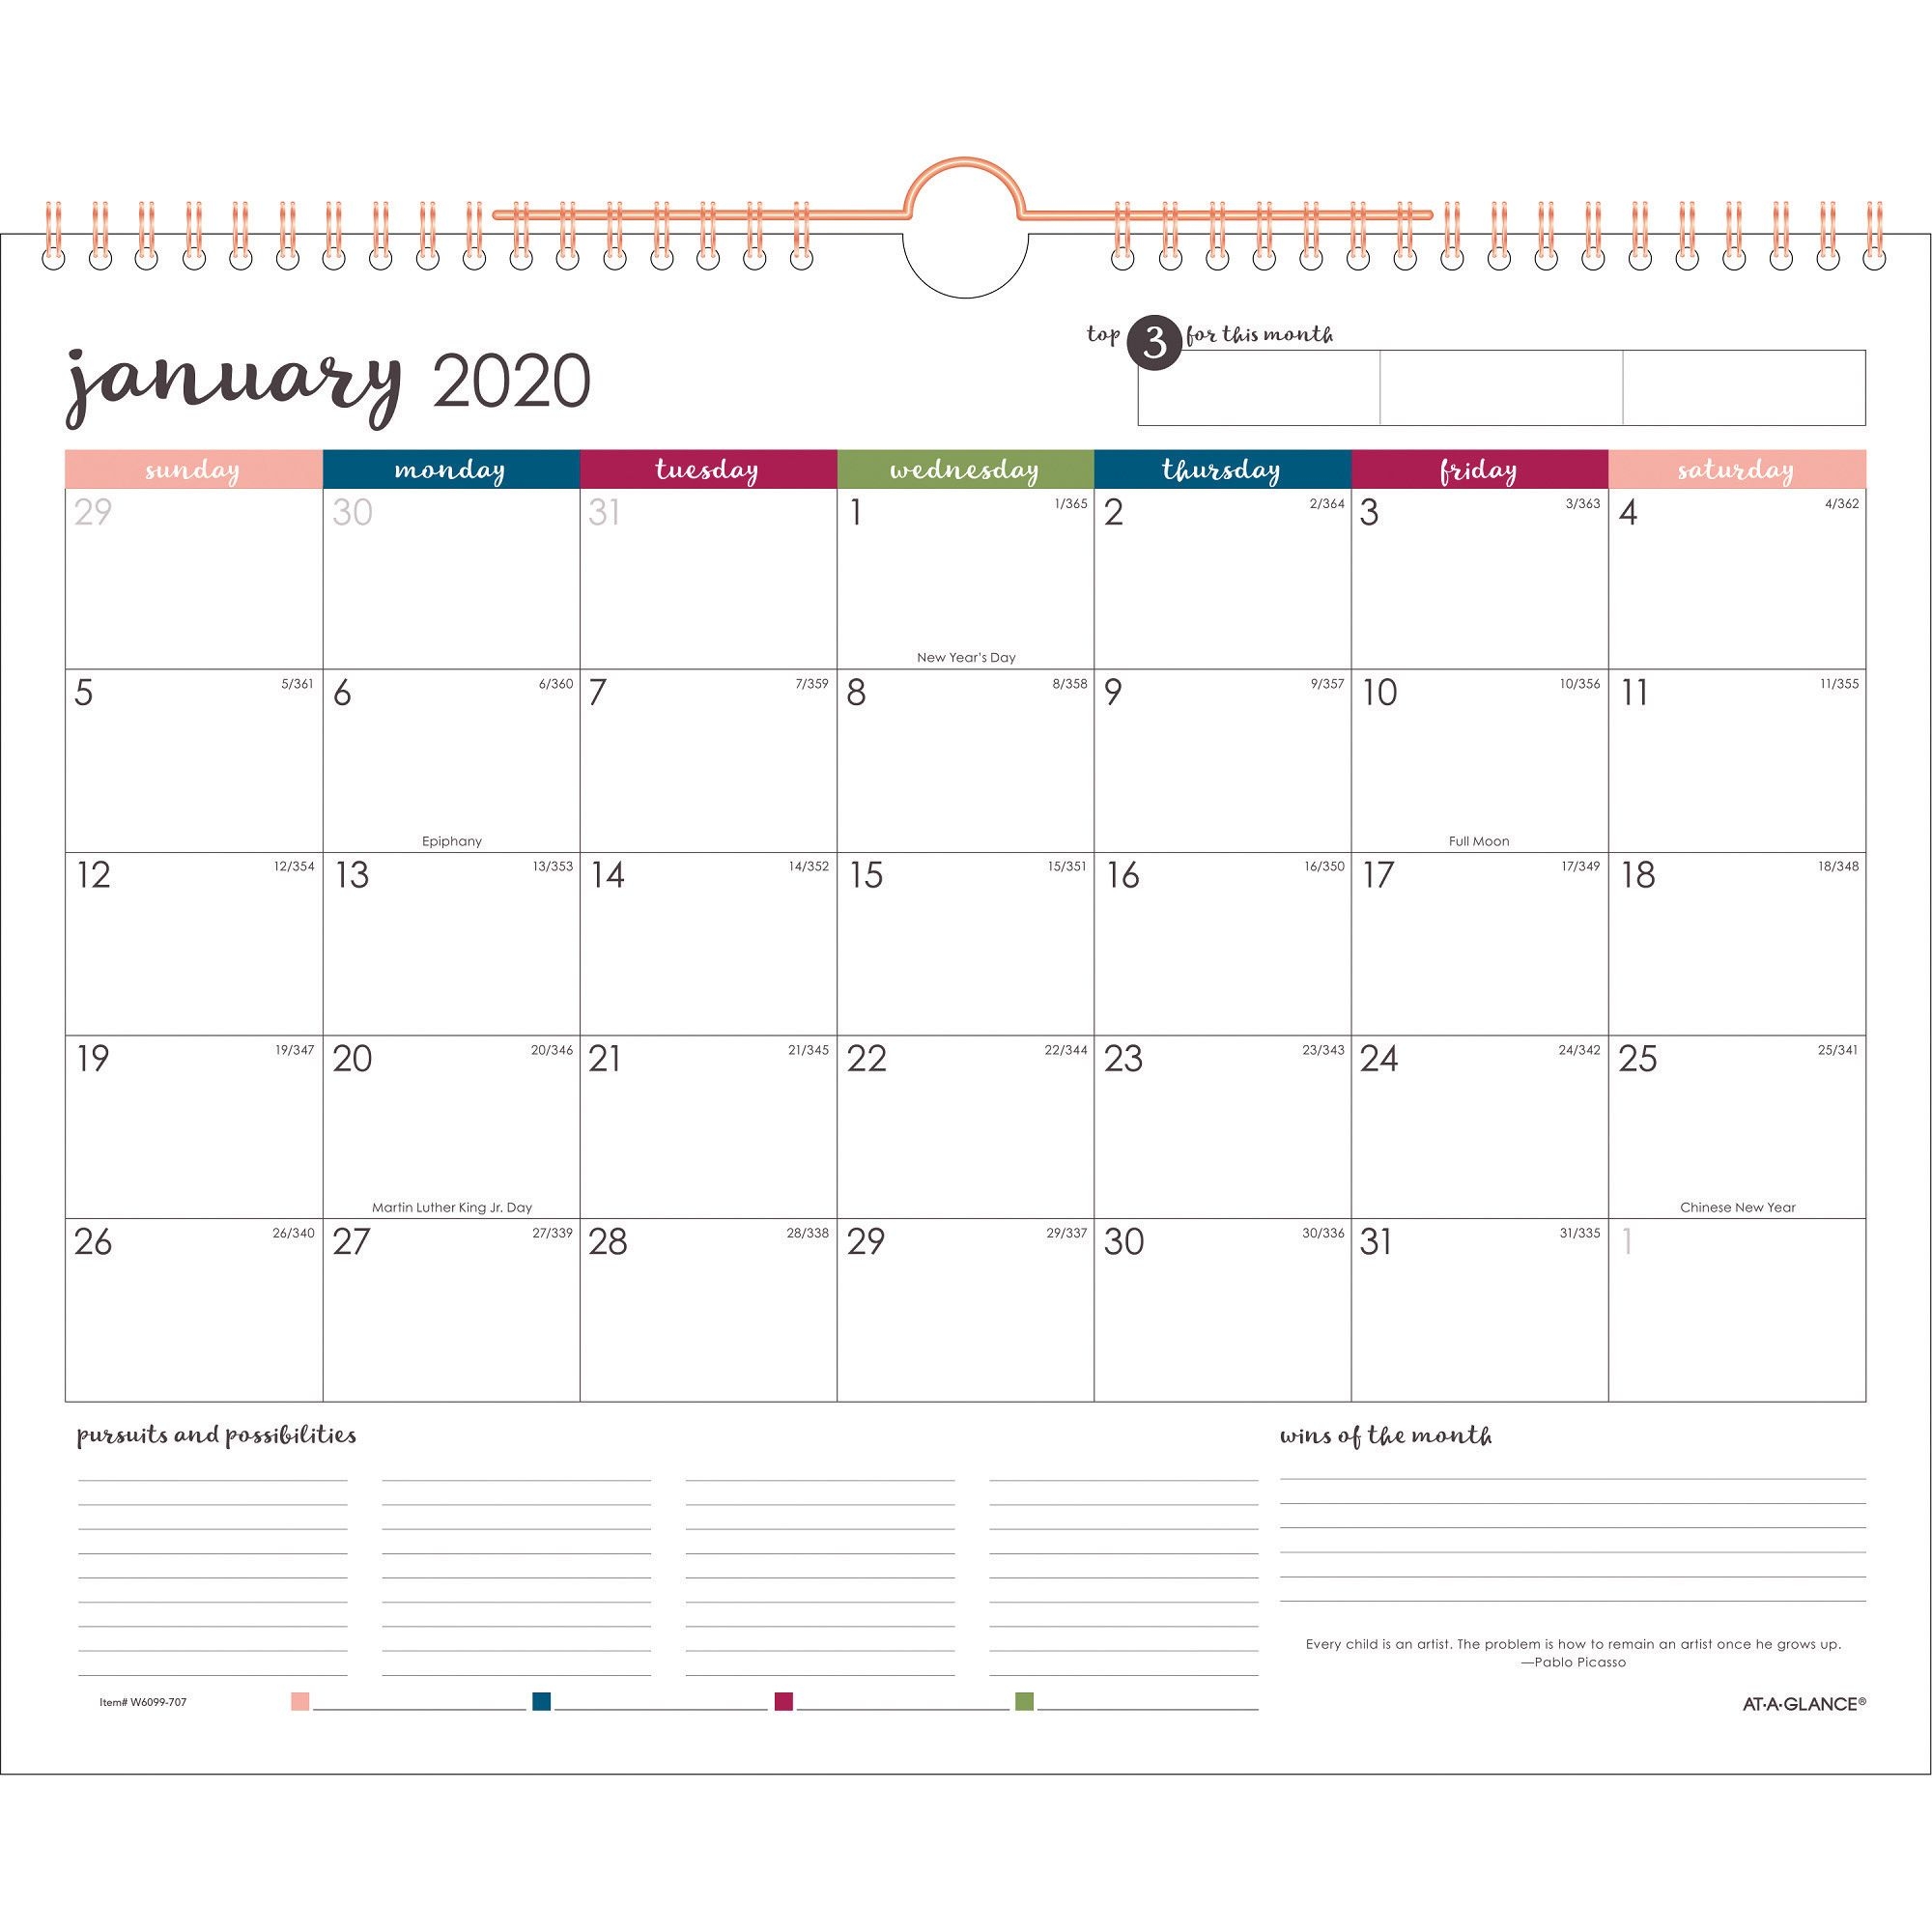 At-A-Glance Harmony Wall Calendar - Yes - Monthly - 1 Year